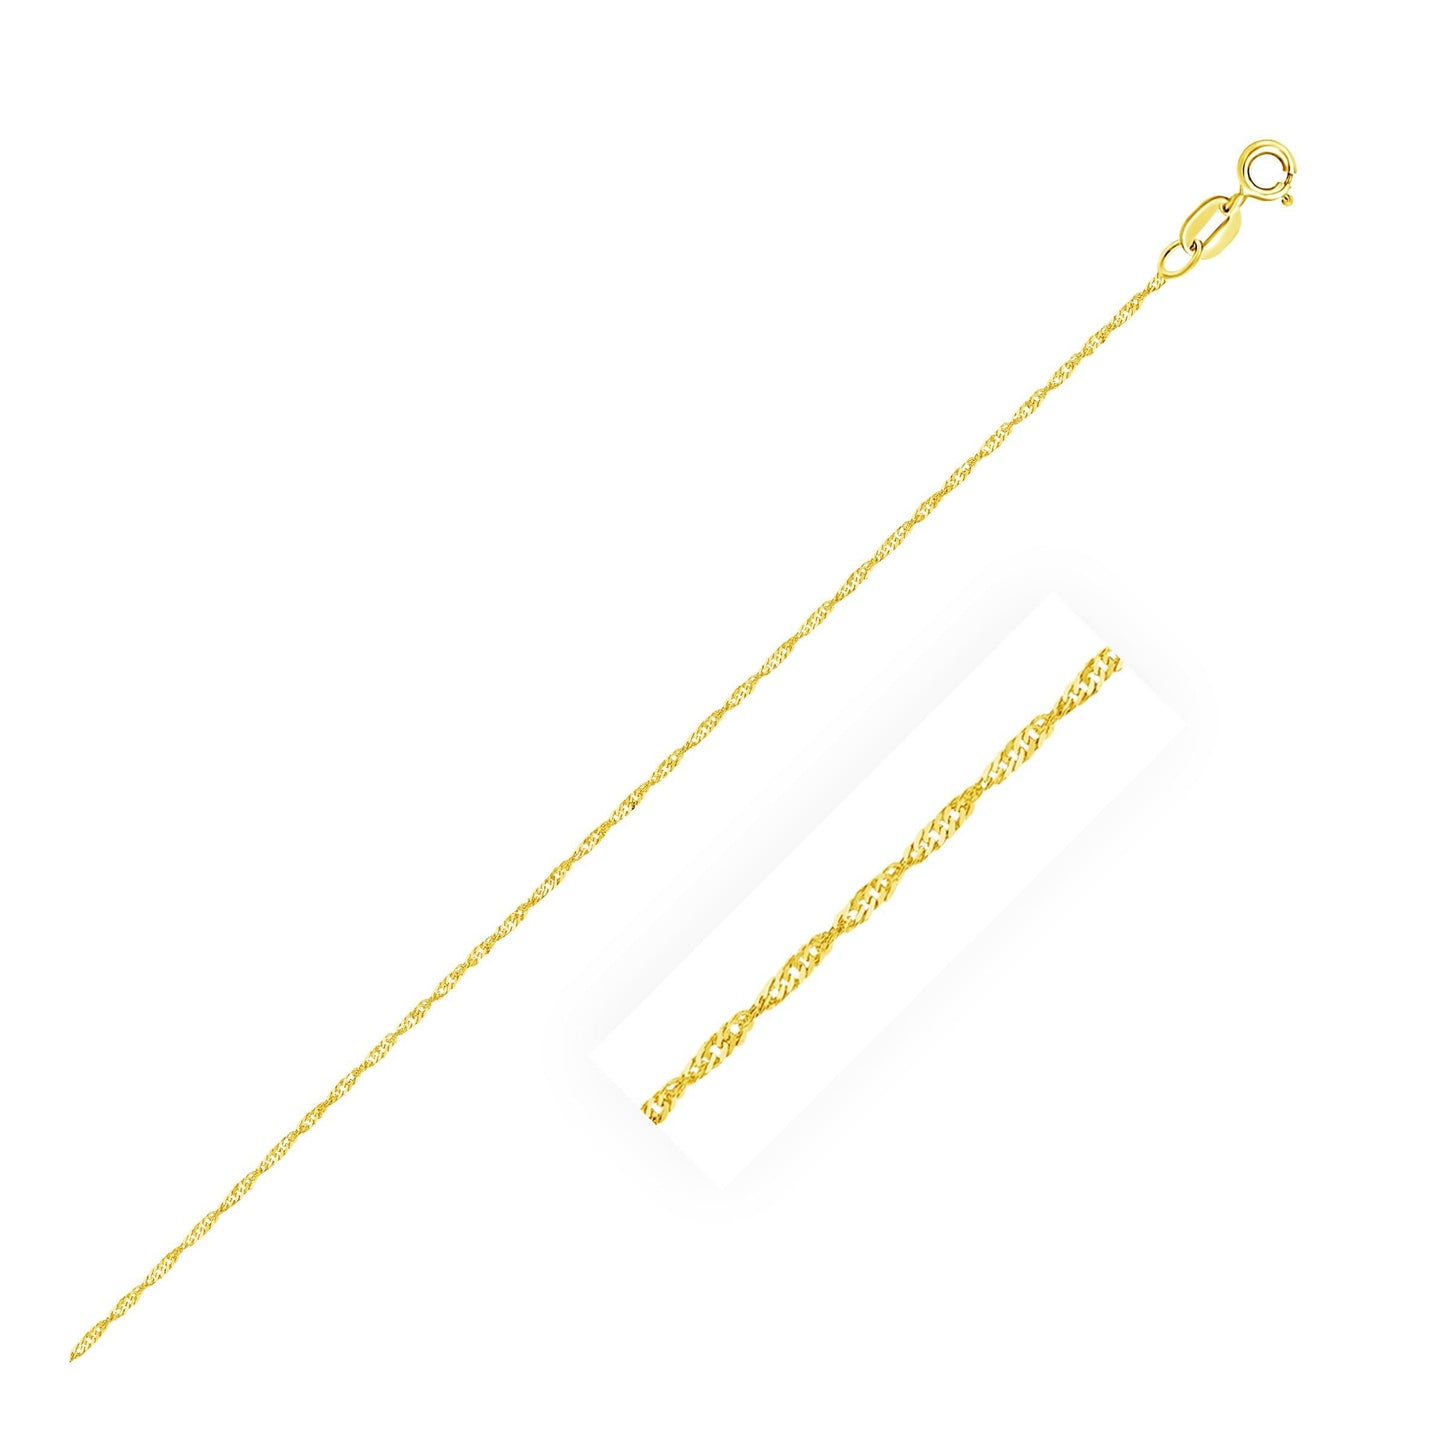 10k Yellow Gold Singapore Chain in 0.8 mm